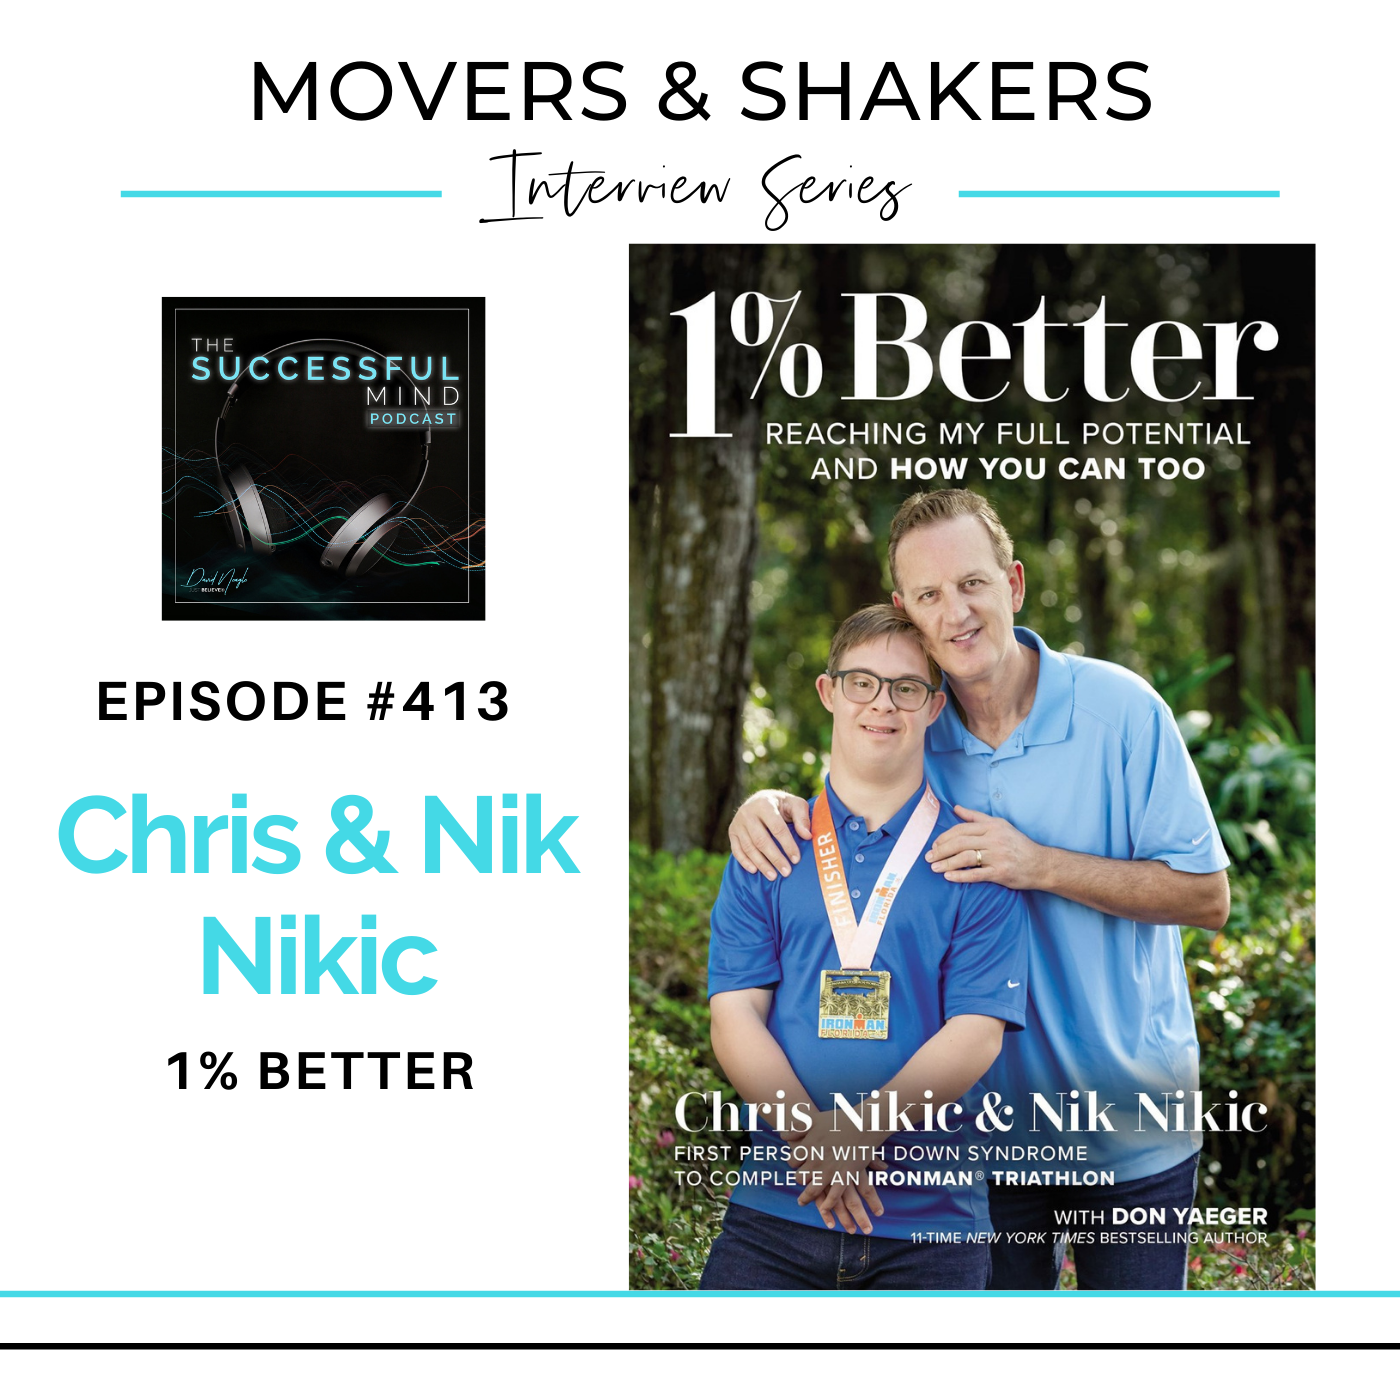 The Successful Mind Podcast - Movers & Shakers - Chris & Nik Nikic